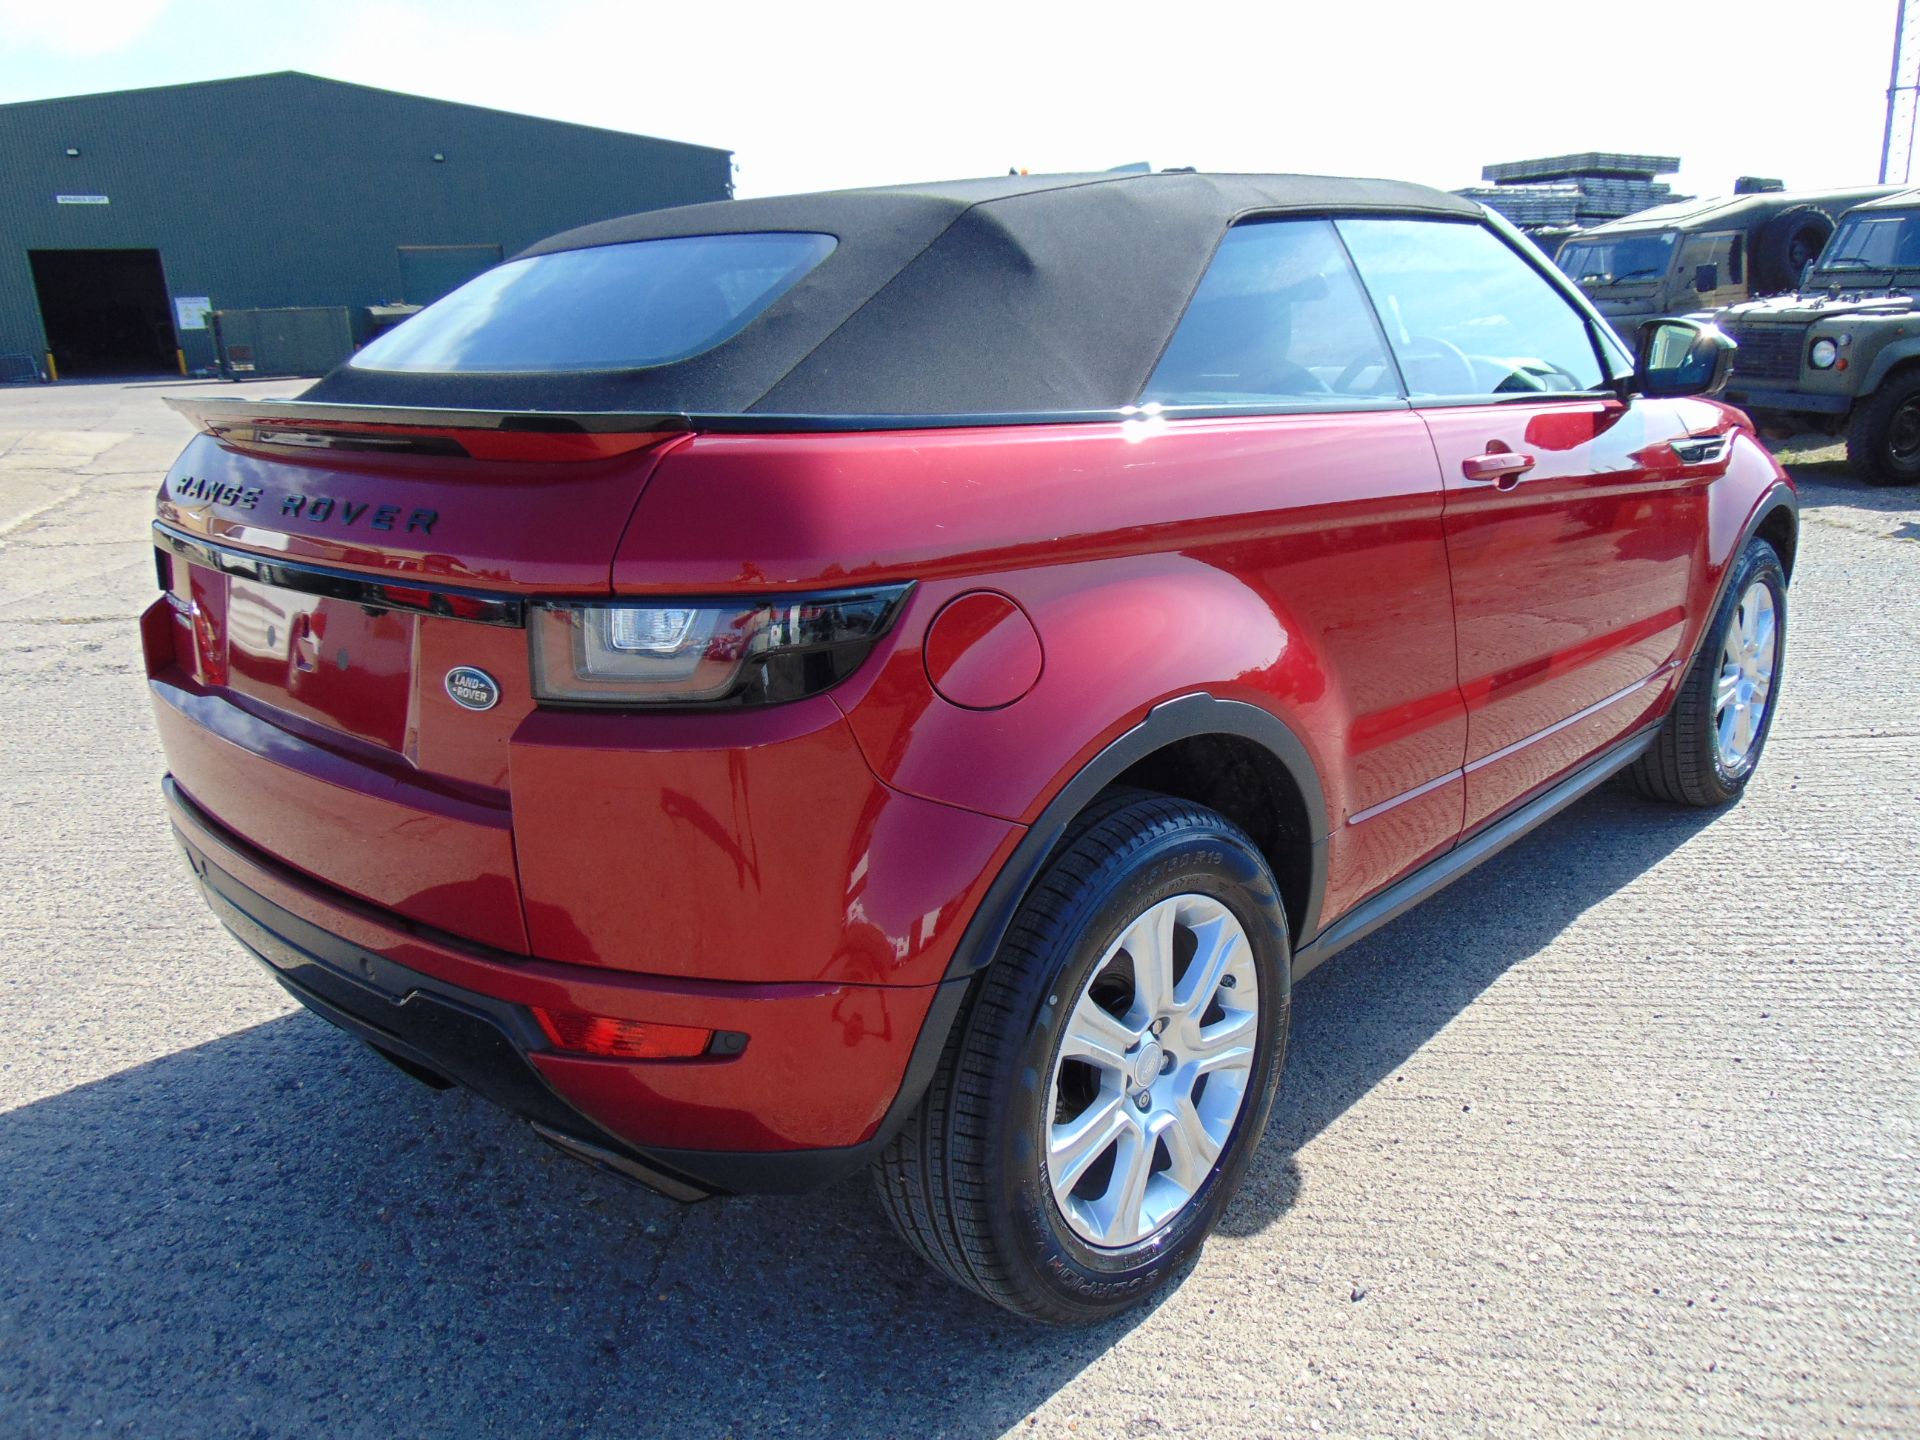 2017 model year a NEW & UNUSED Range Rover Evoque 2.0 i4 HSE dynamic convertible - Image 6 of 39